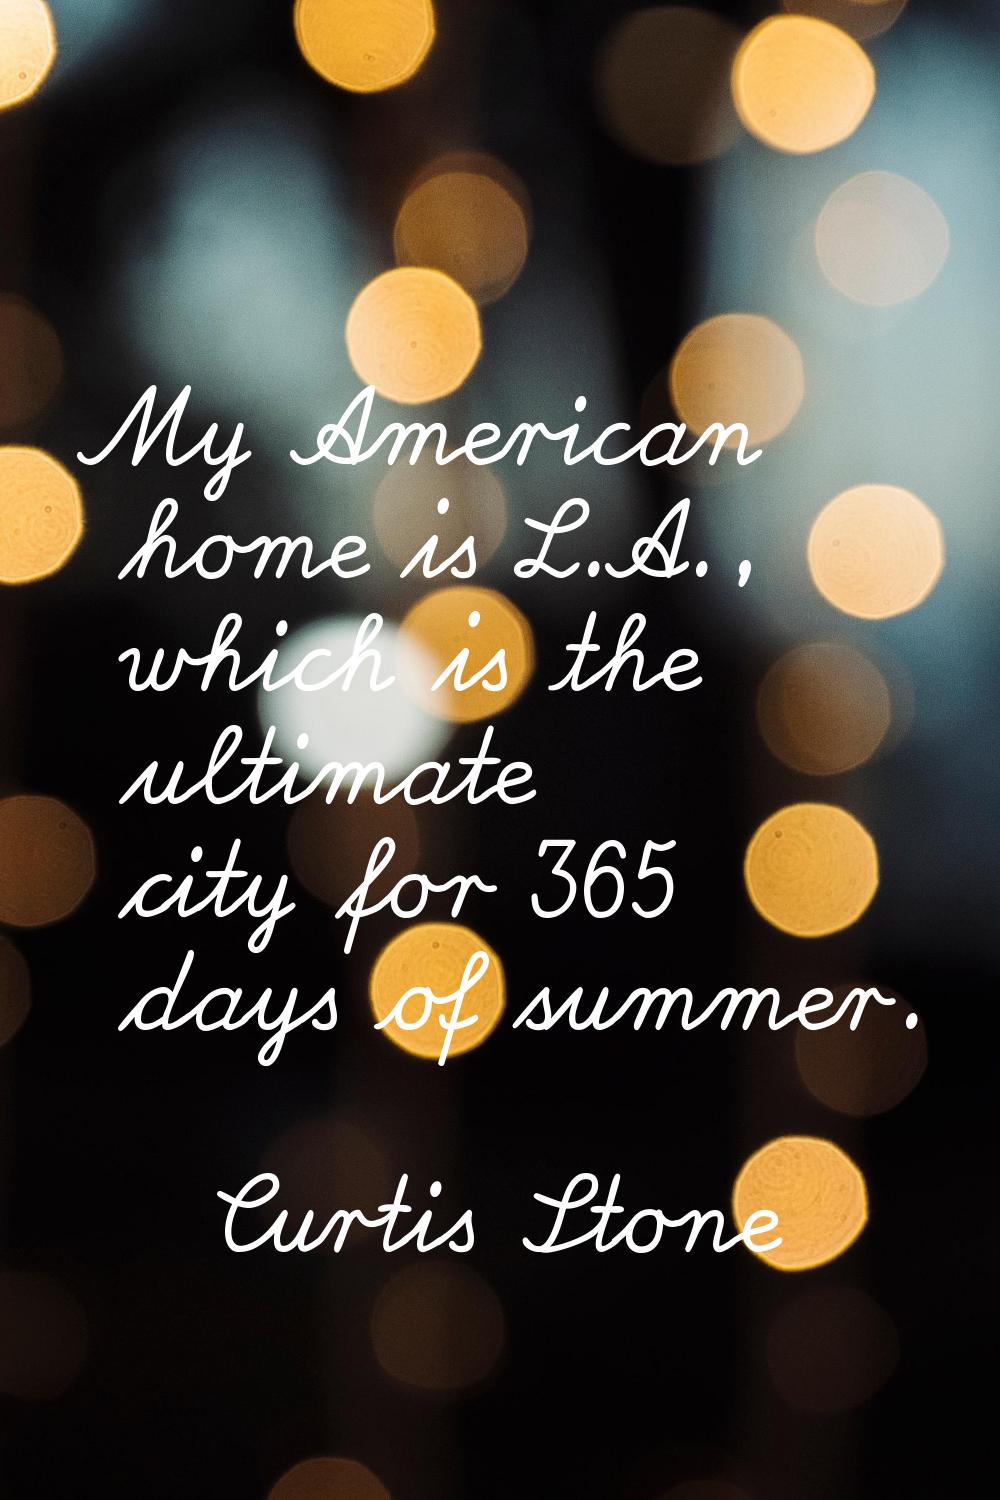 My American home is L.A., which is the ultimate city for 365 days of summer.